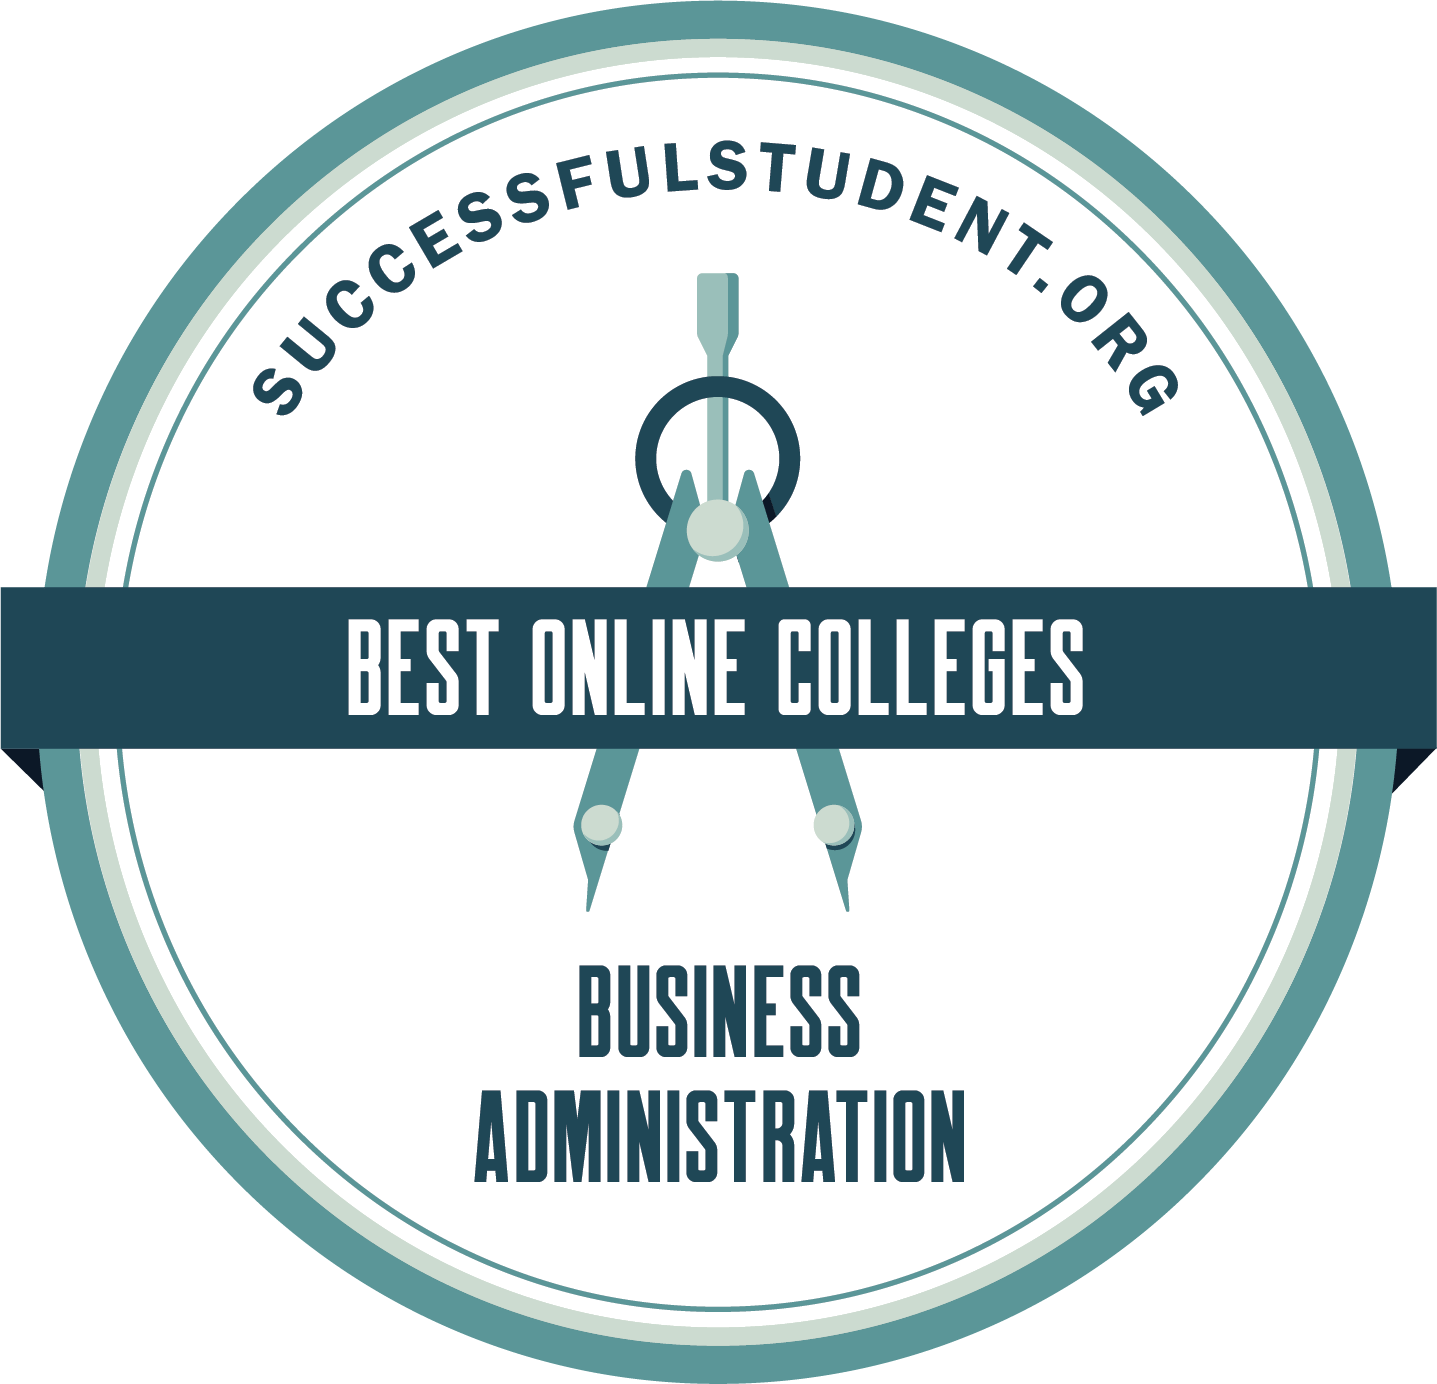 The Best Online Business Administration Colleges's Badge